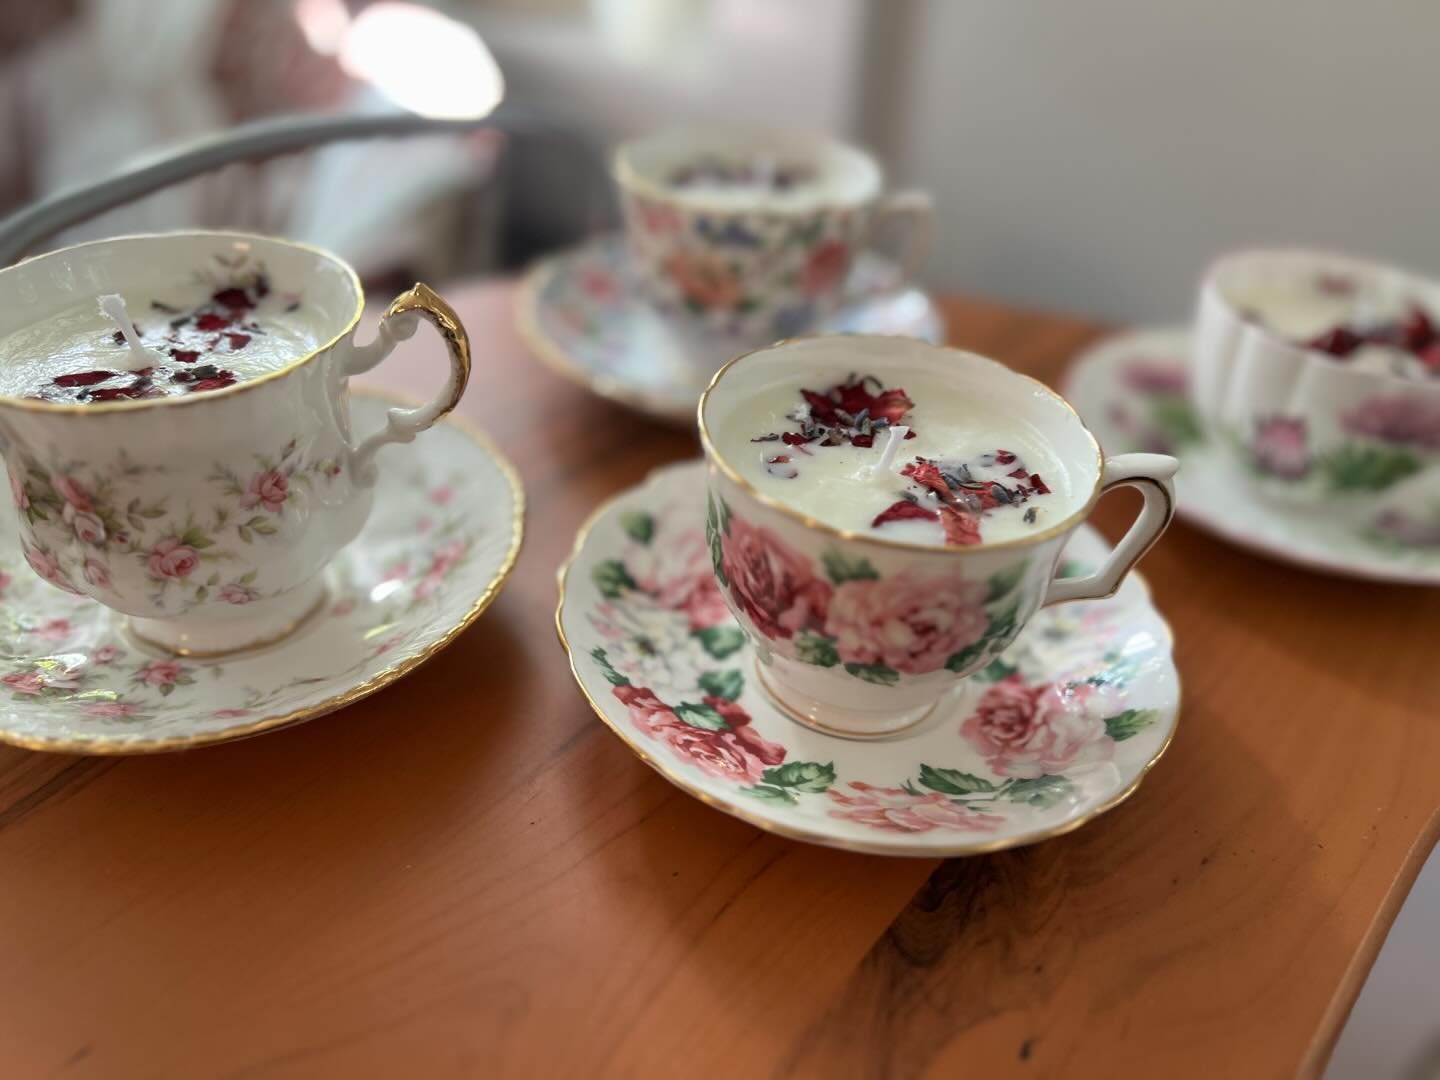 These artisan made candles in vintage tea cups are heading to The Cottage for tonight&rsquo;s Mother&rsquo;s Day Pop Up from 6:00-9:00. Vintage jewelry and handbag Pop Up. Plus a entry to win raffle, yummies from Liz Larkin (aka The Scone Lady). And 